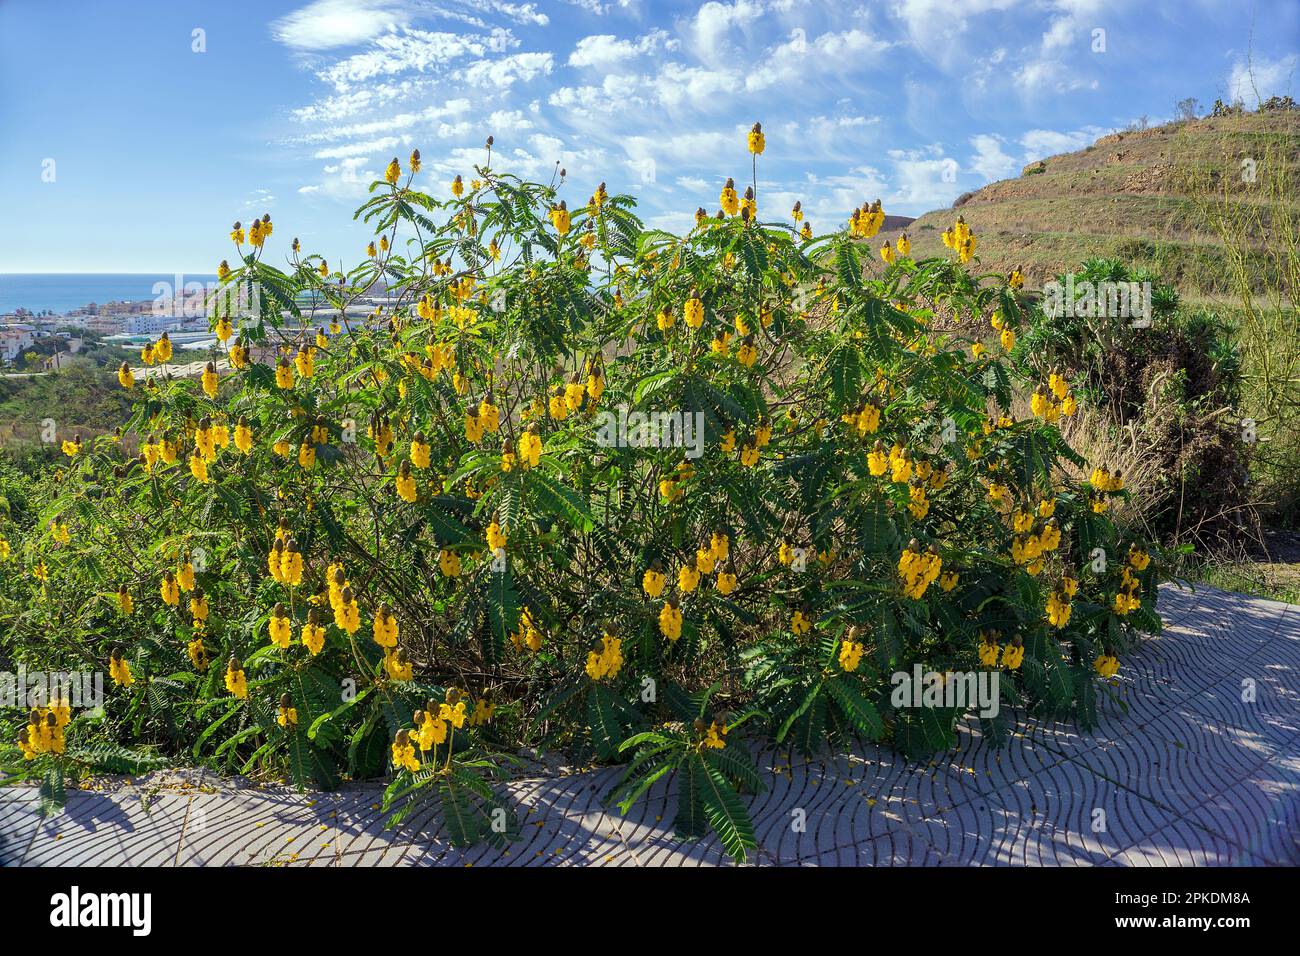 Candle bush (Senna didymobotrya), blooming, native to Africa, Andalusia, Costa del Sol, Spain, Europe Stock Photo